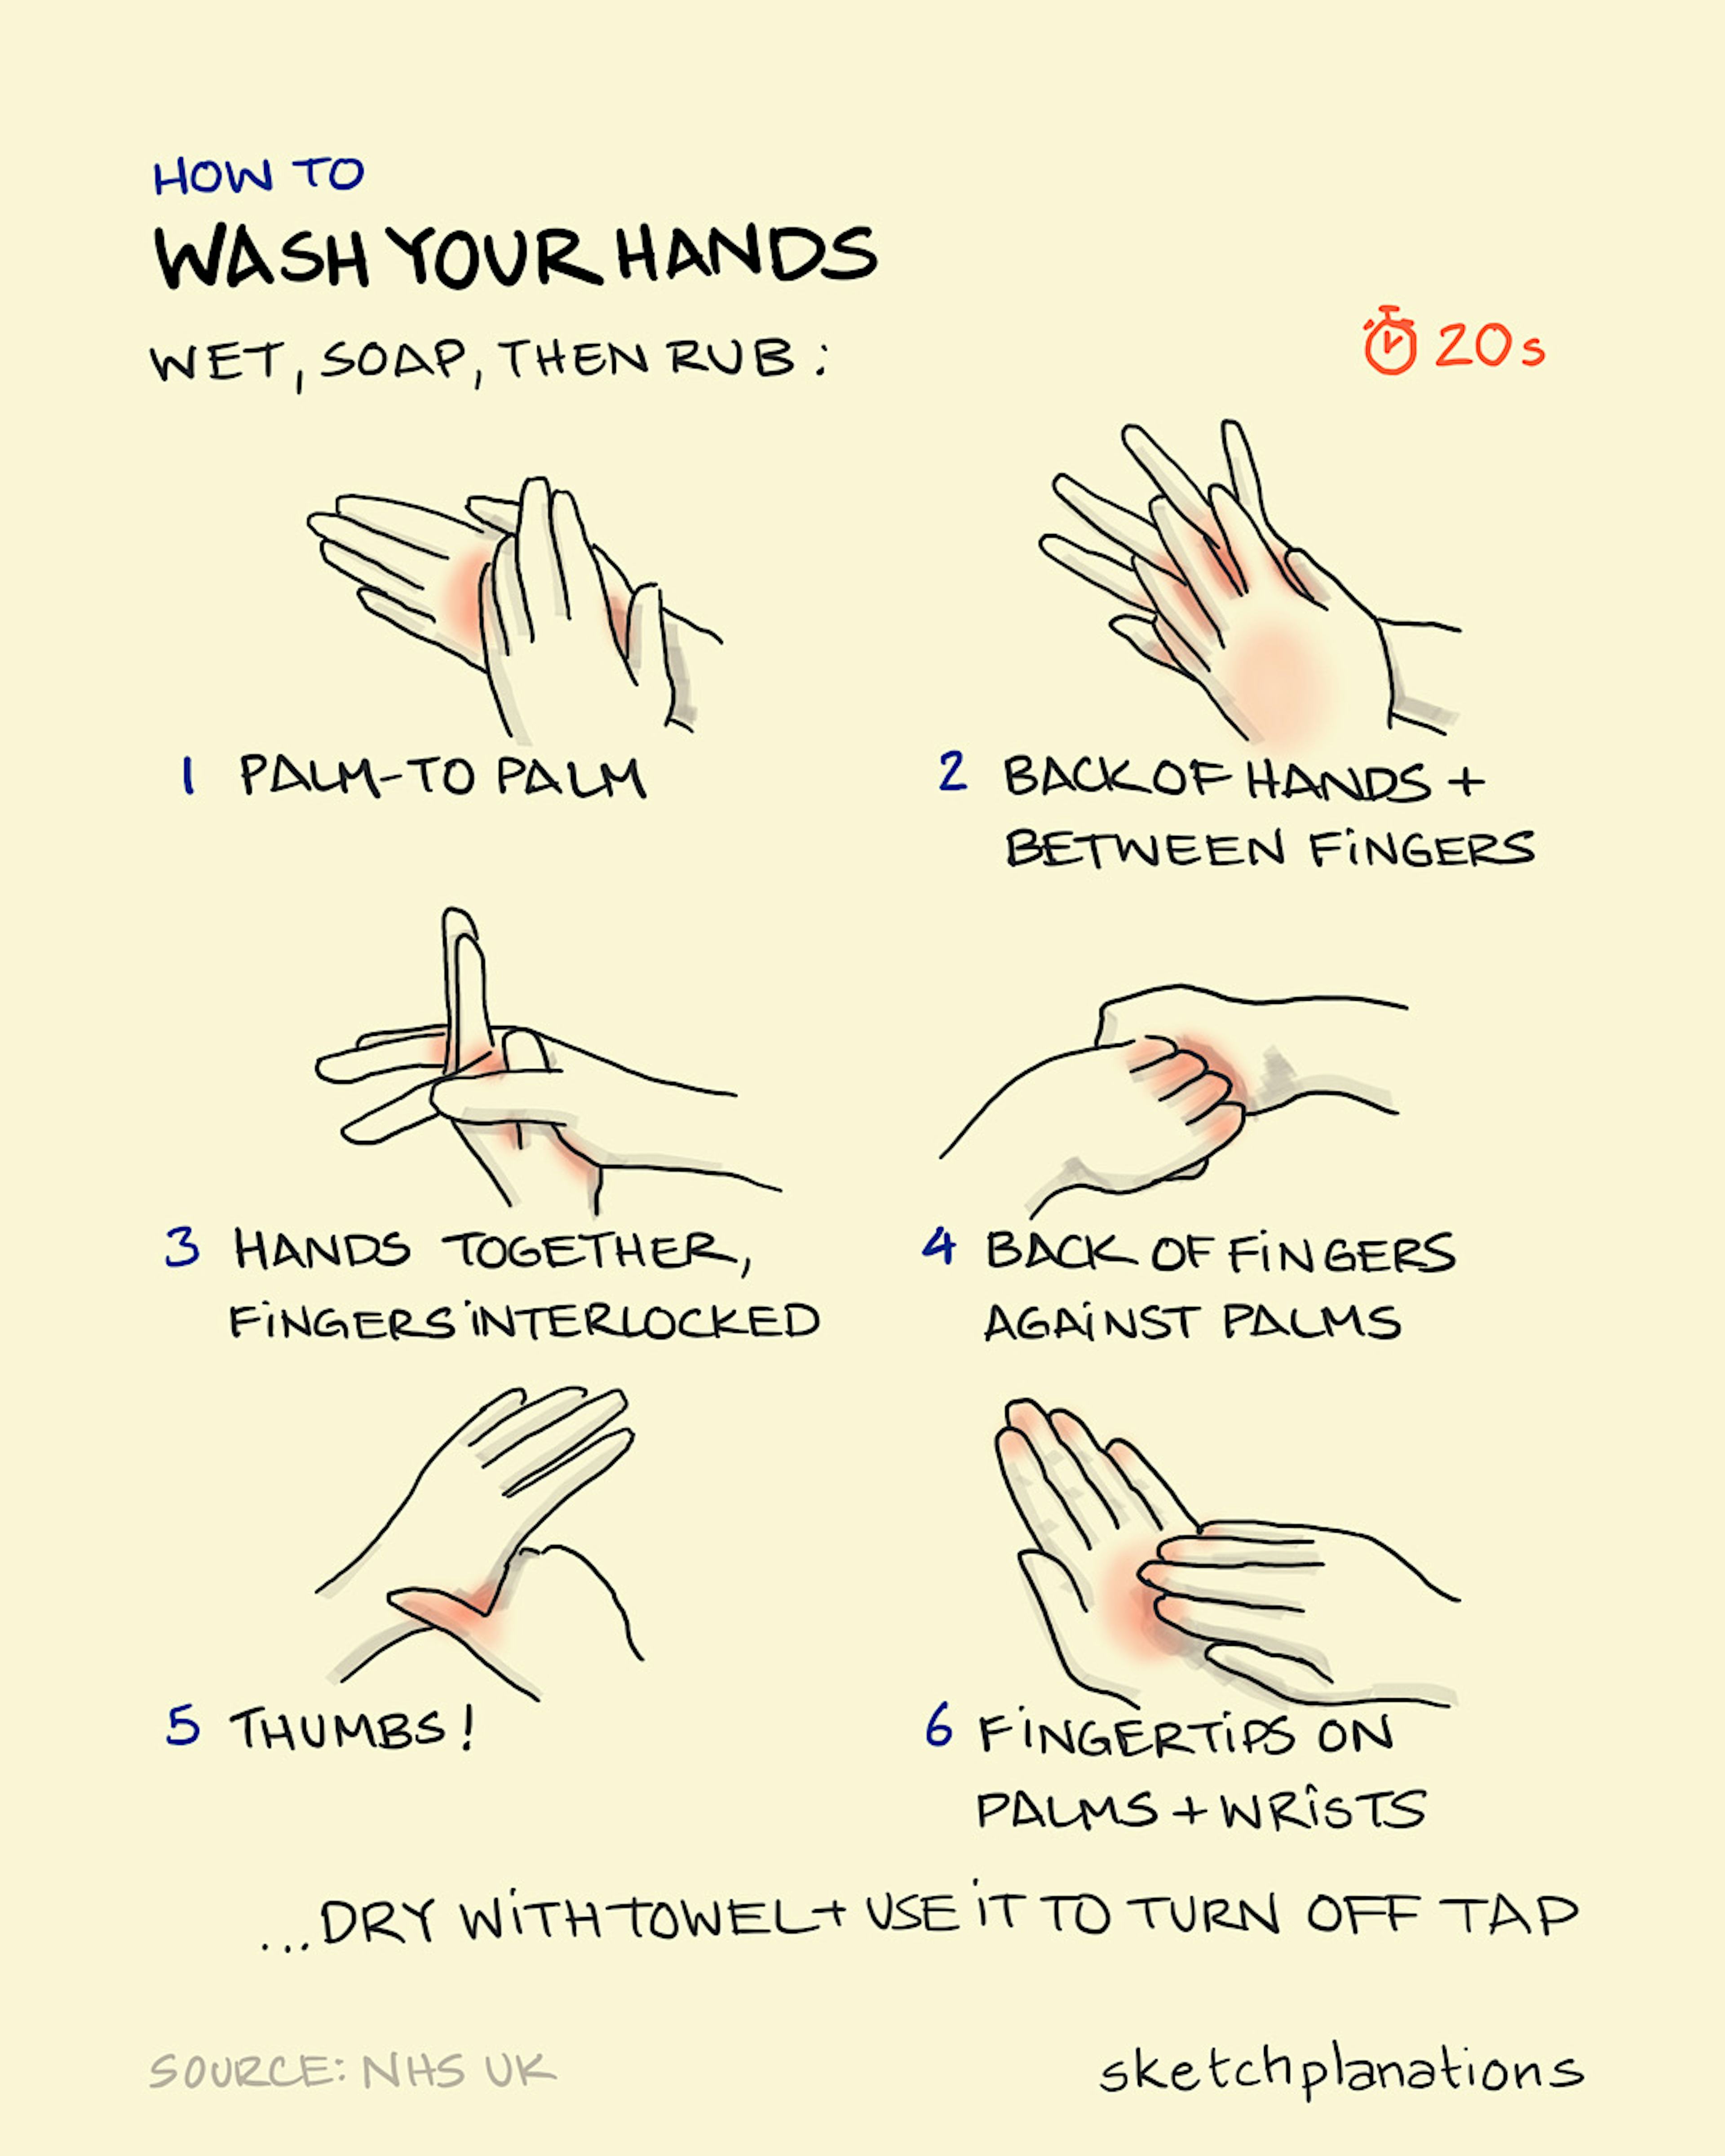 How to wash your hands illustration: the 6-step guide shows how to make sure you wash your hands thoroughly; getting right into all the nooks, crannies, creases and folds of your fingers, thumbs, palms and backs of your hands. A minimum of 20 seconds wash time is recommended. 